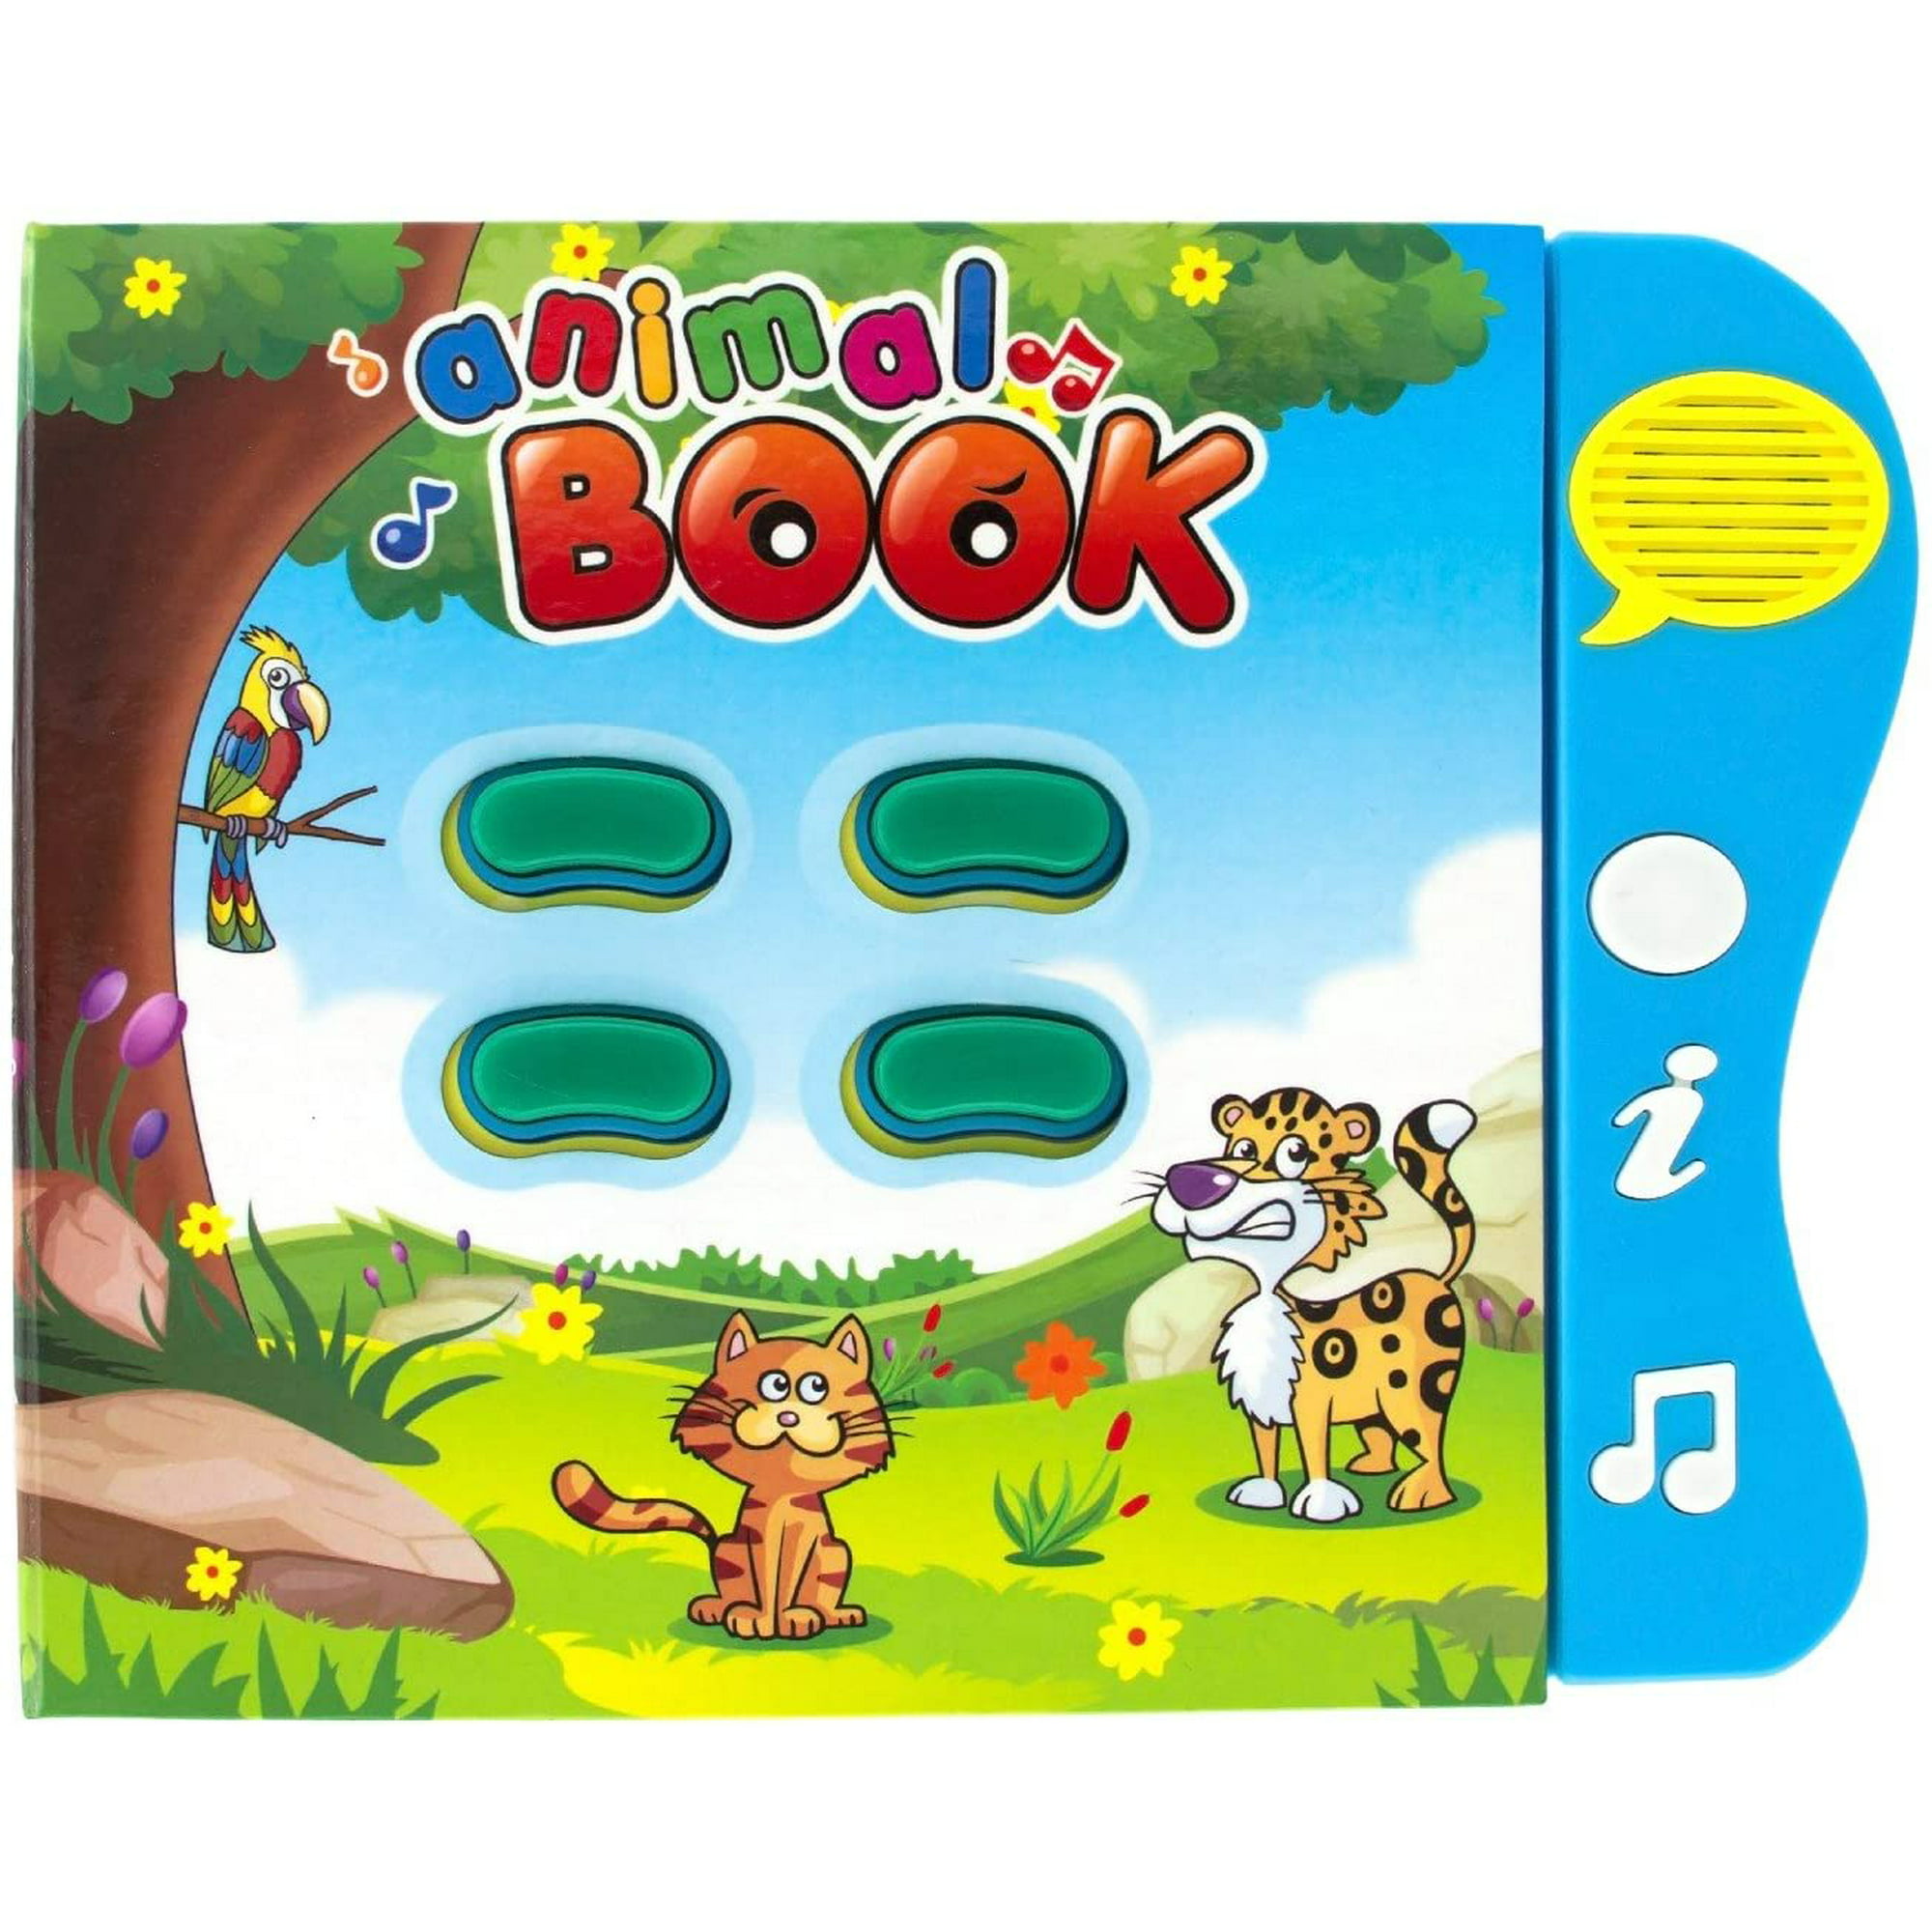 Animal Learning Sound Book by Boxiki Kids. Activity Book For Toddlers and  Early Baby Development. Electronic Animal Book: Play Music, Learn Animal  Names, Sounds and More | Walmart Canada